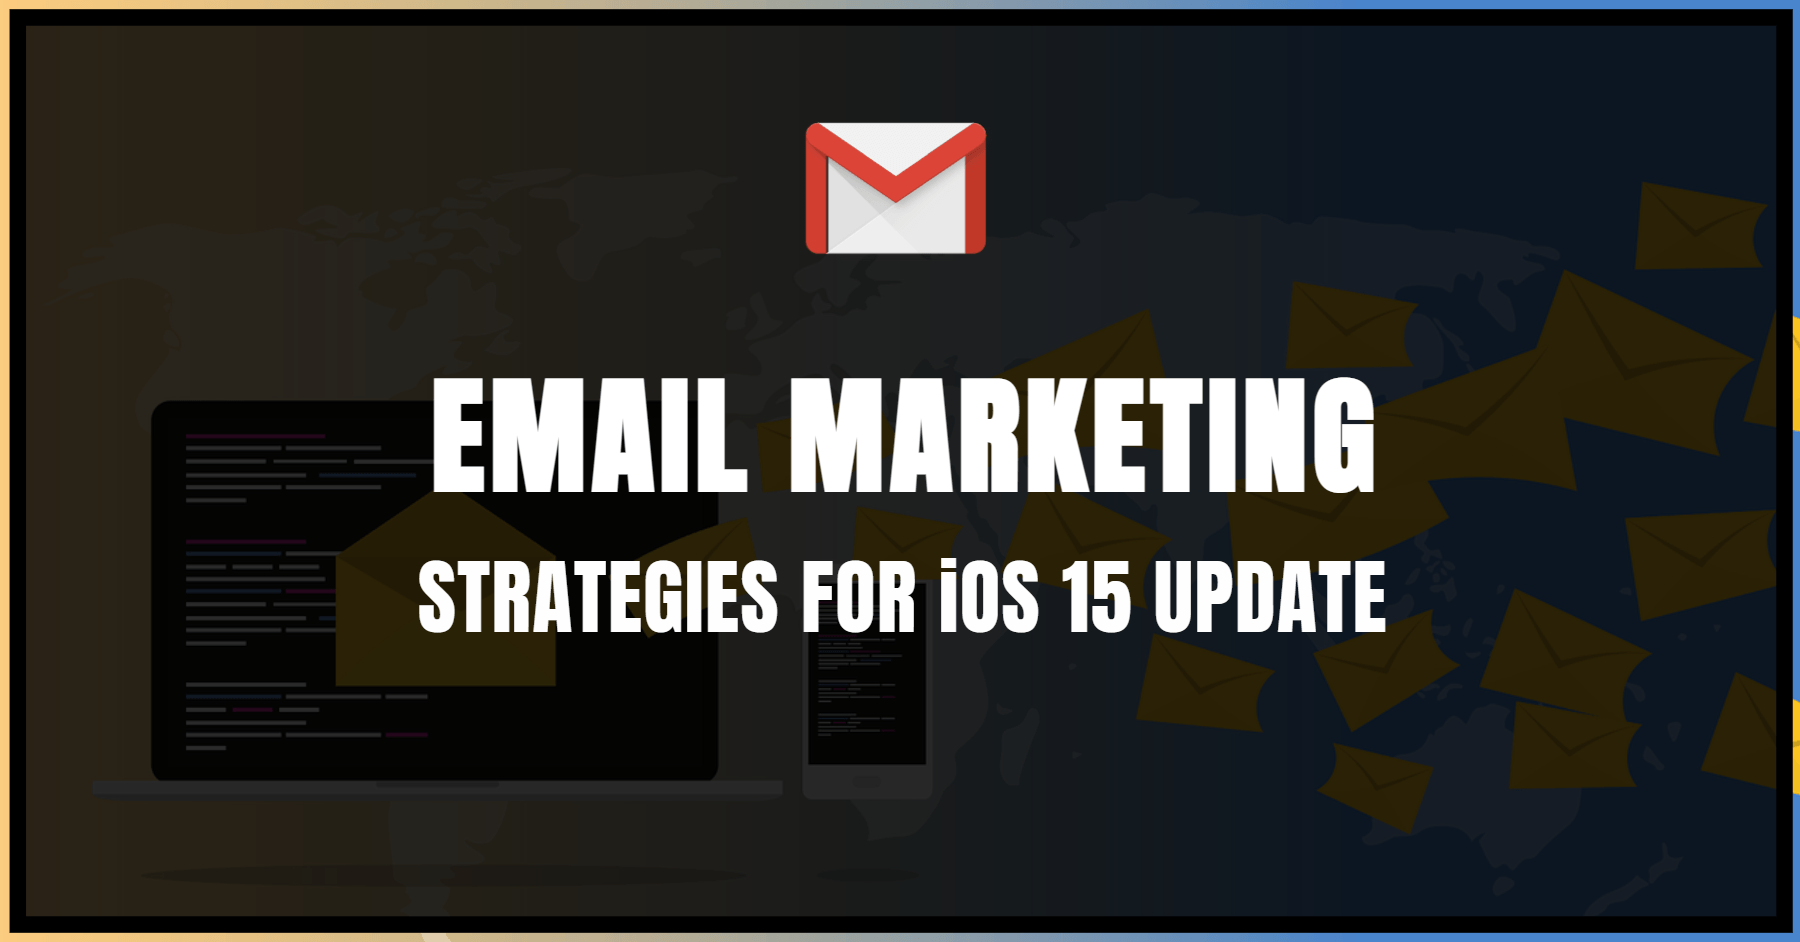 How to Prepare Your Email Marketing Strategy for iOS 15